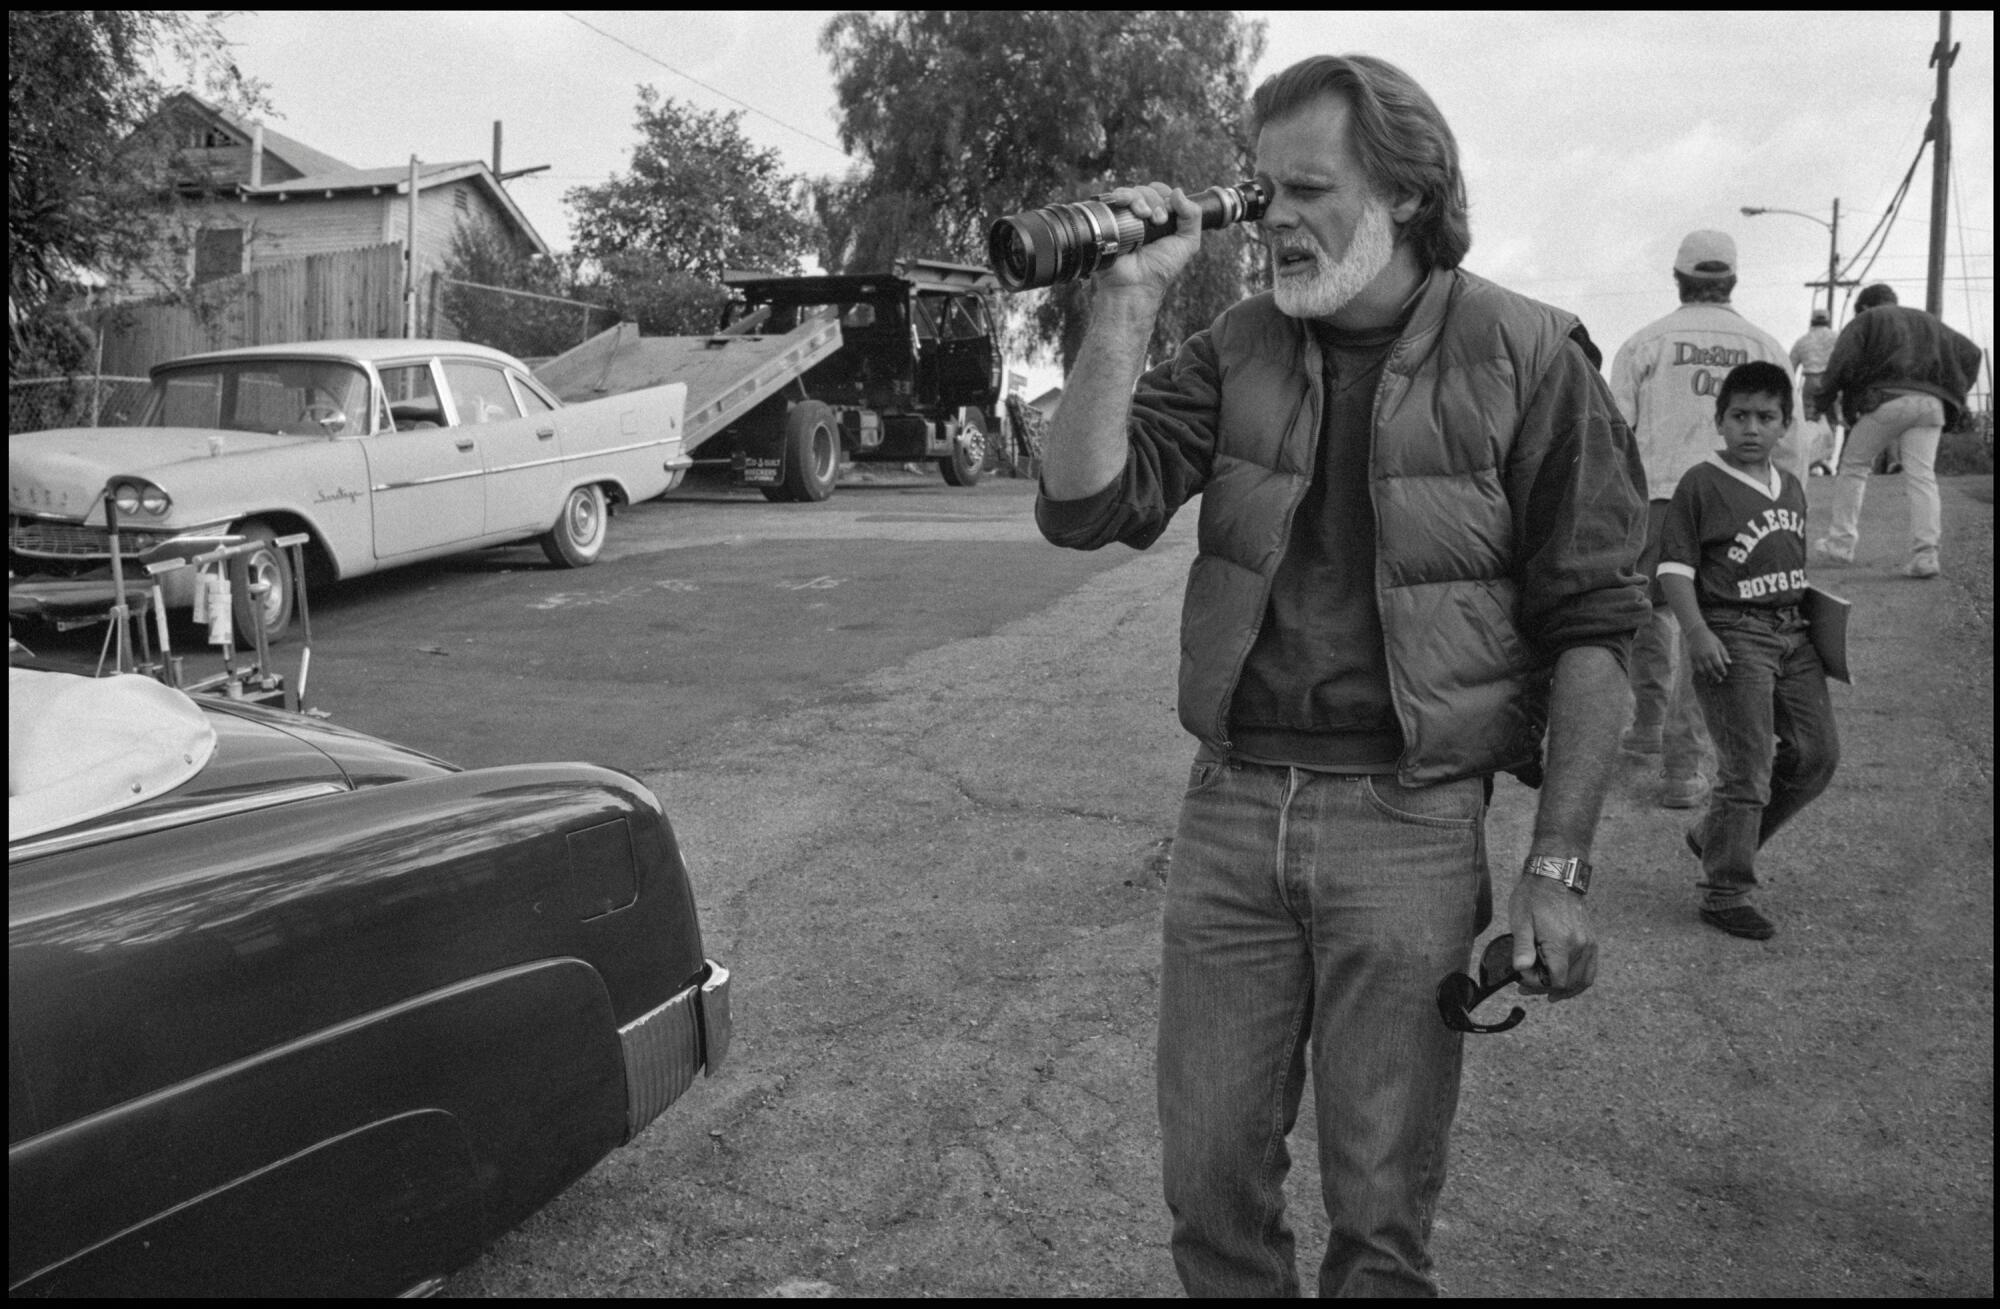 Director Taylor Hackford looks through a lens while standing next to a vintage car.